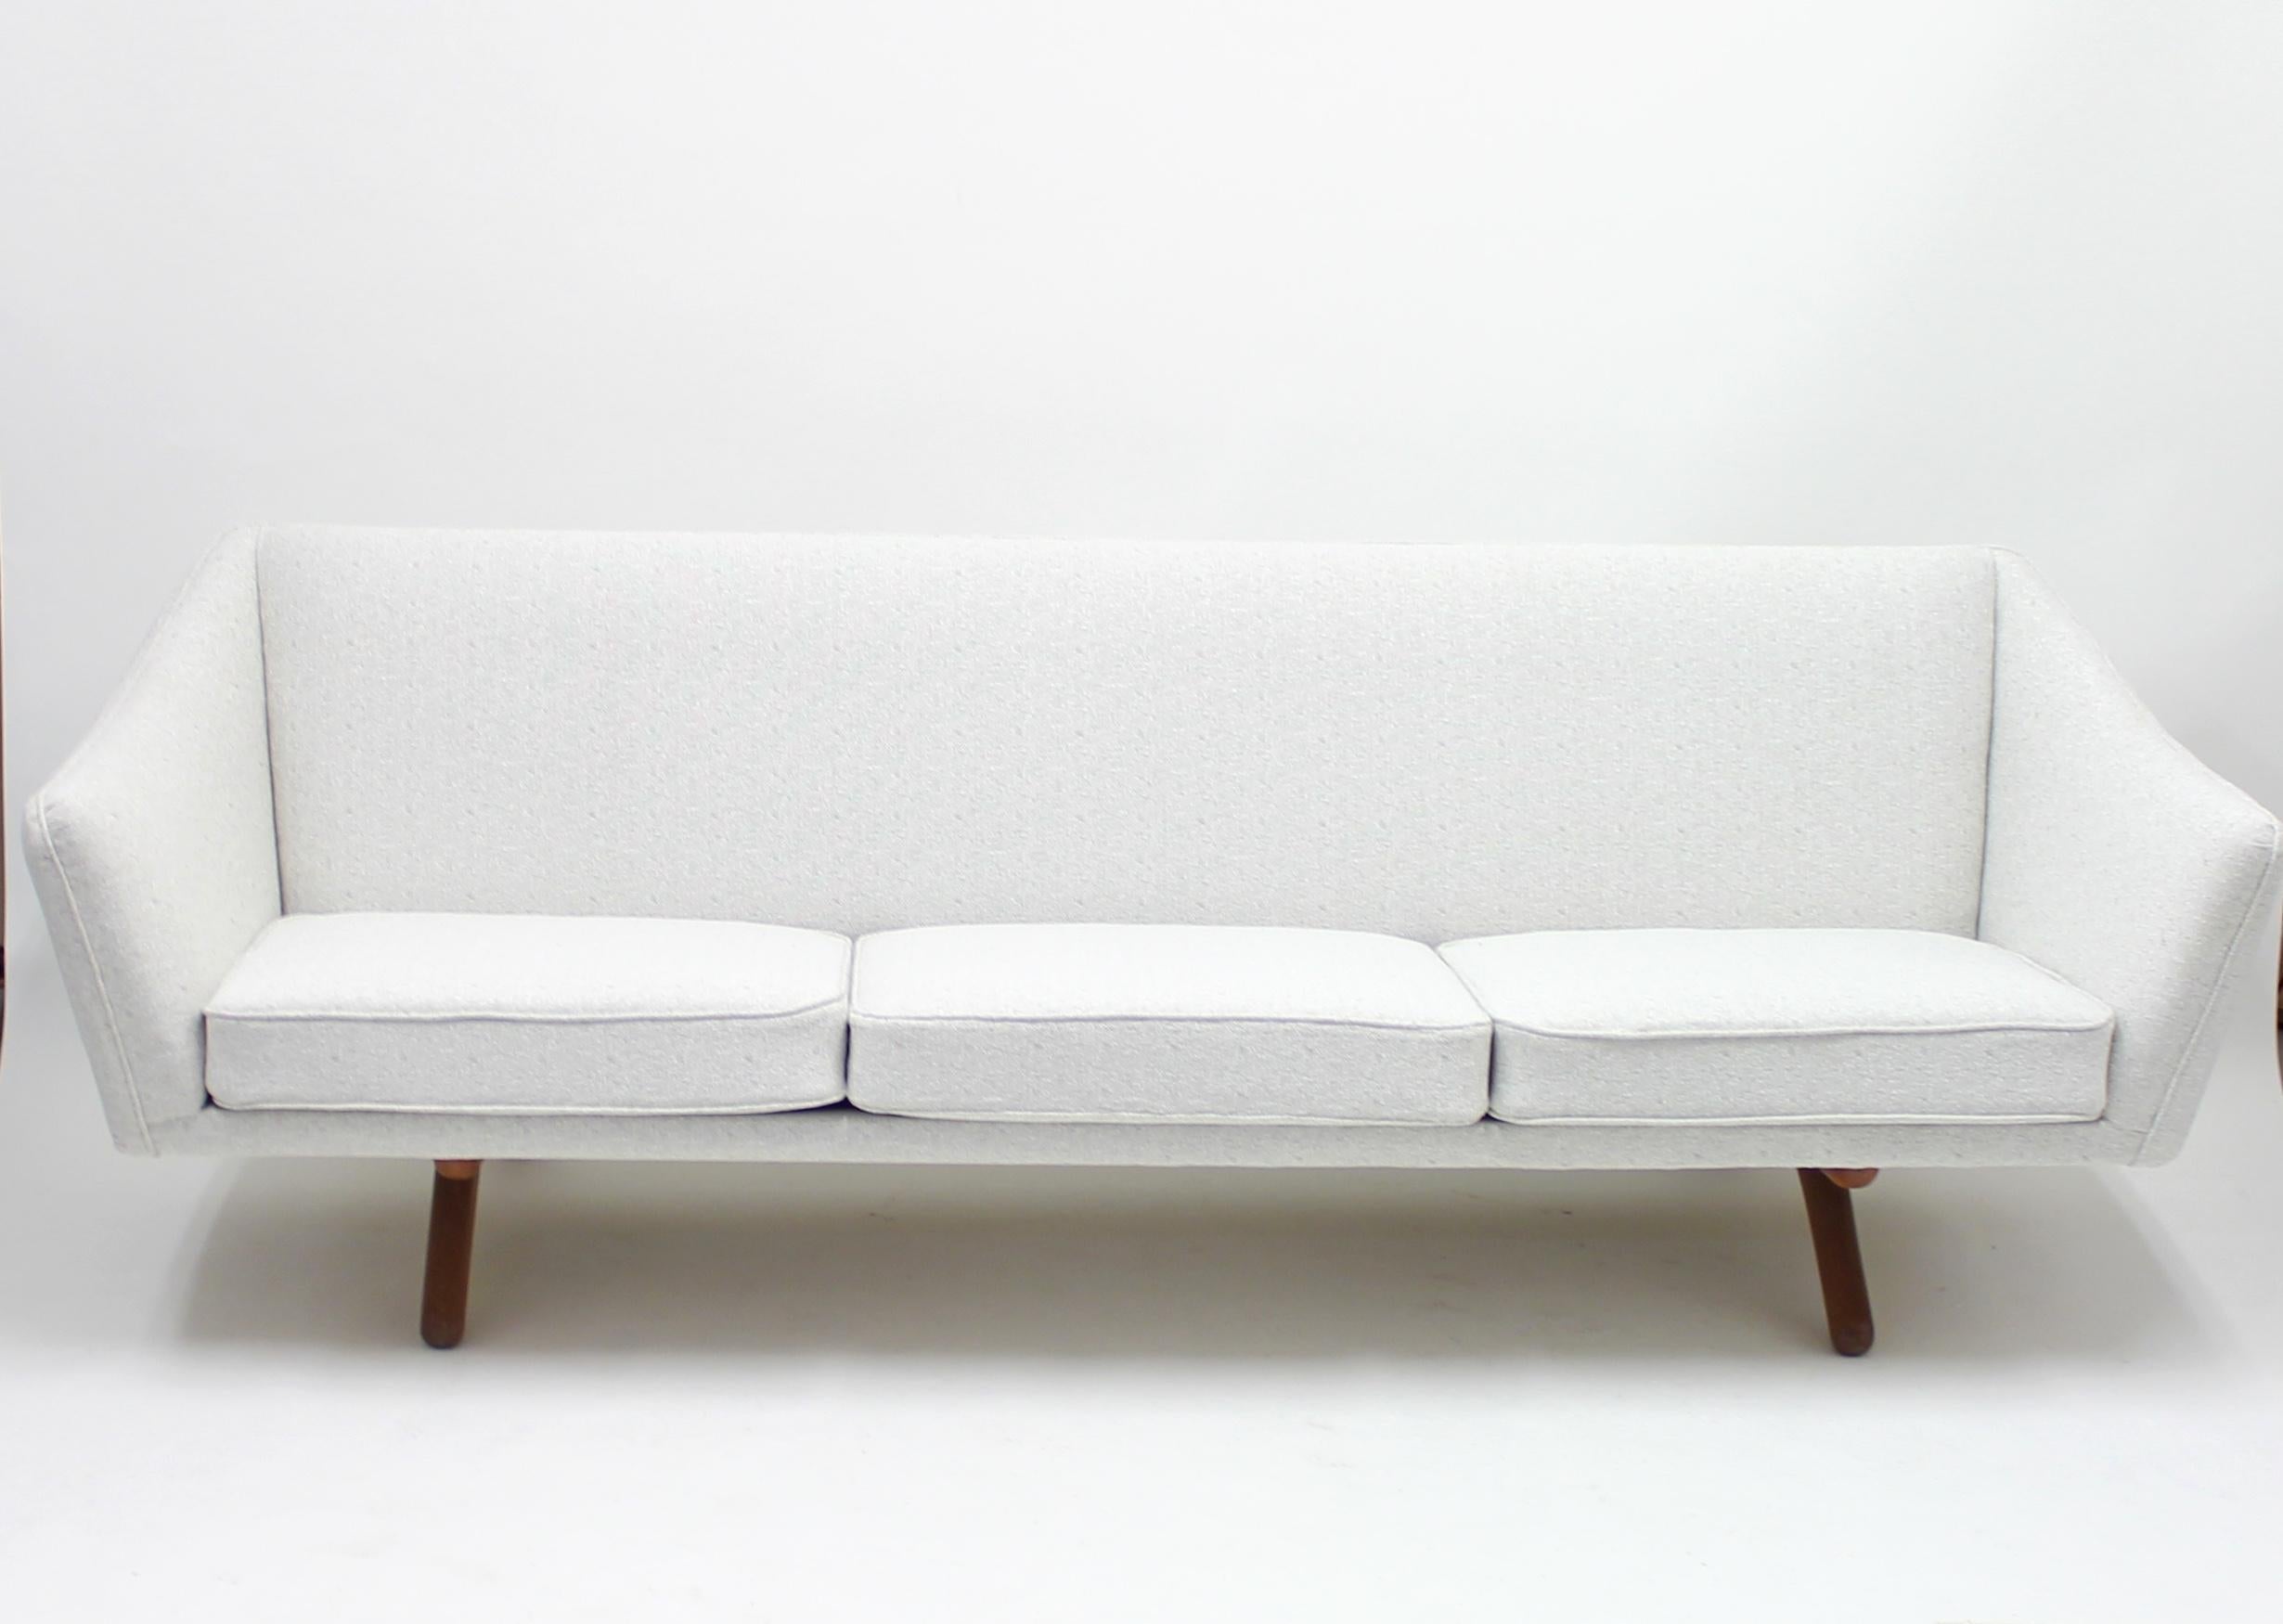 Three seater sofa, model ML-140, designed by Illum Wikkelsø for A/S Michael Laursen. An all Danish collaboration. Newly upholstered in an off-white fabric that sits on a teak base with A-shaped legs. Very good condition with minimal ware.